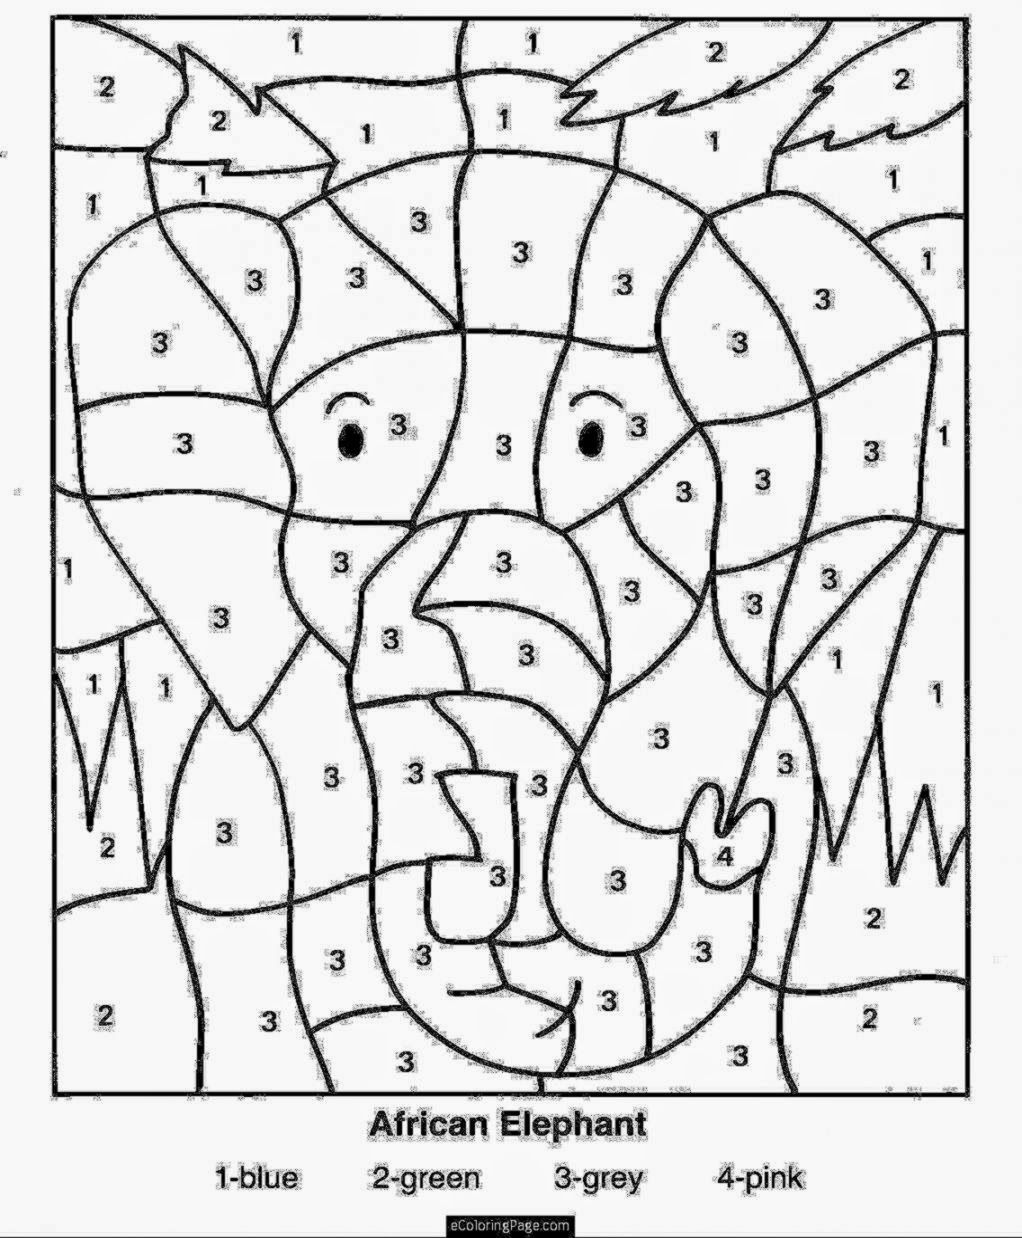 Printable Color By Number Sheets Free Coloring Sheet Effy Moom Free Coloring Picture wallpaper give a chance to color on the wall without getting in trouble! Fill the walls of your home or office with stress-relieving [effymoom.blogspot.com]